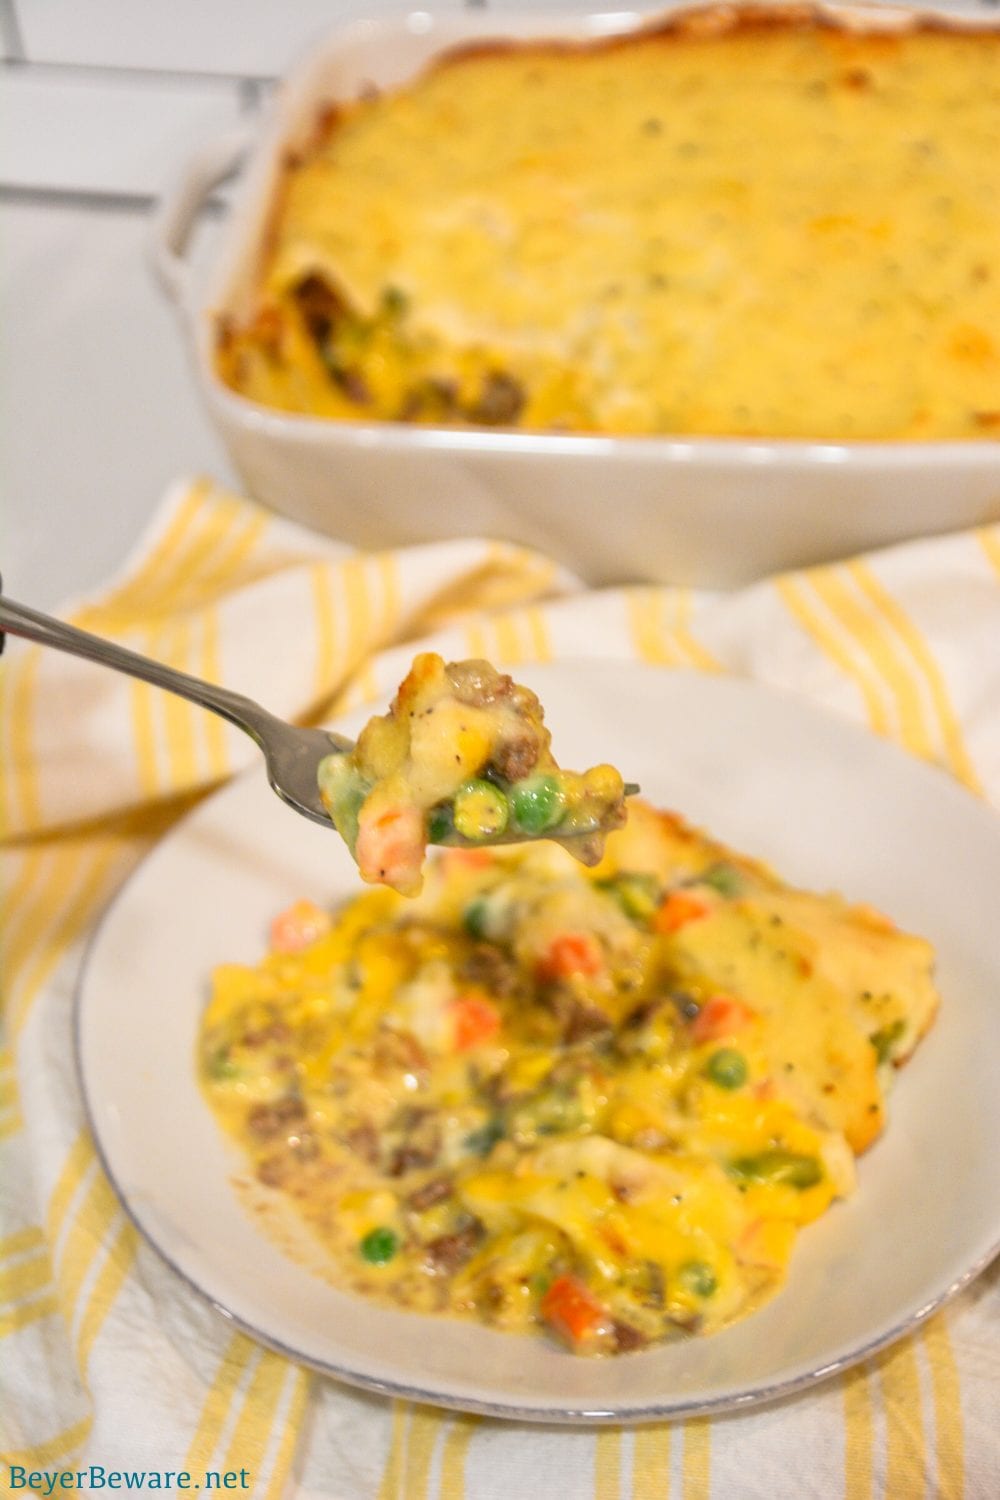 Cheesy Shepherd's Pie is a ground beef casserole filled with mixed vegetables, cheese, cream of mushroom soup, and topped off with mashed potatoes.